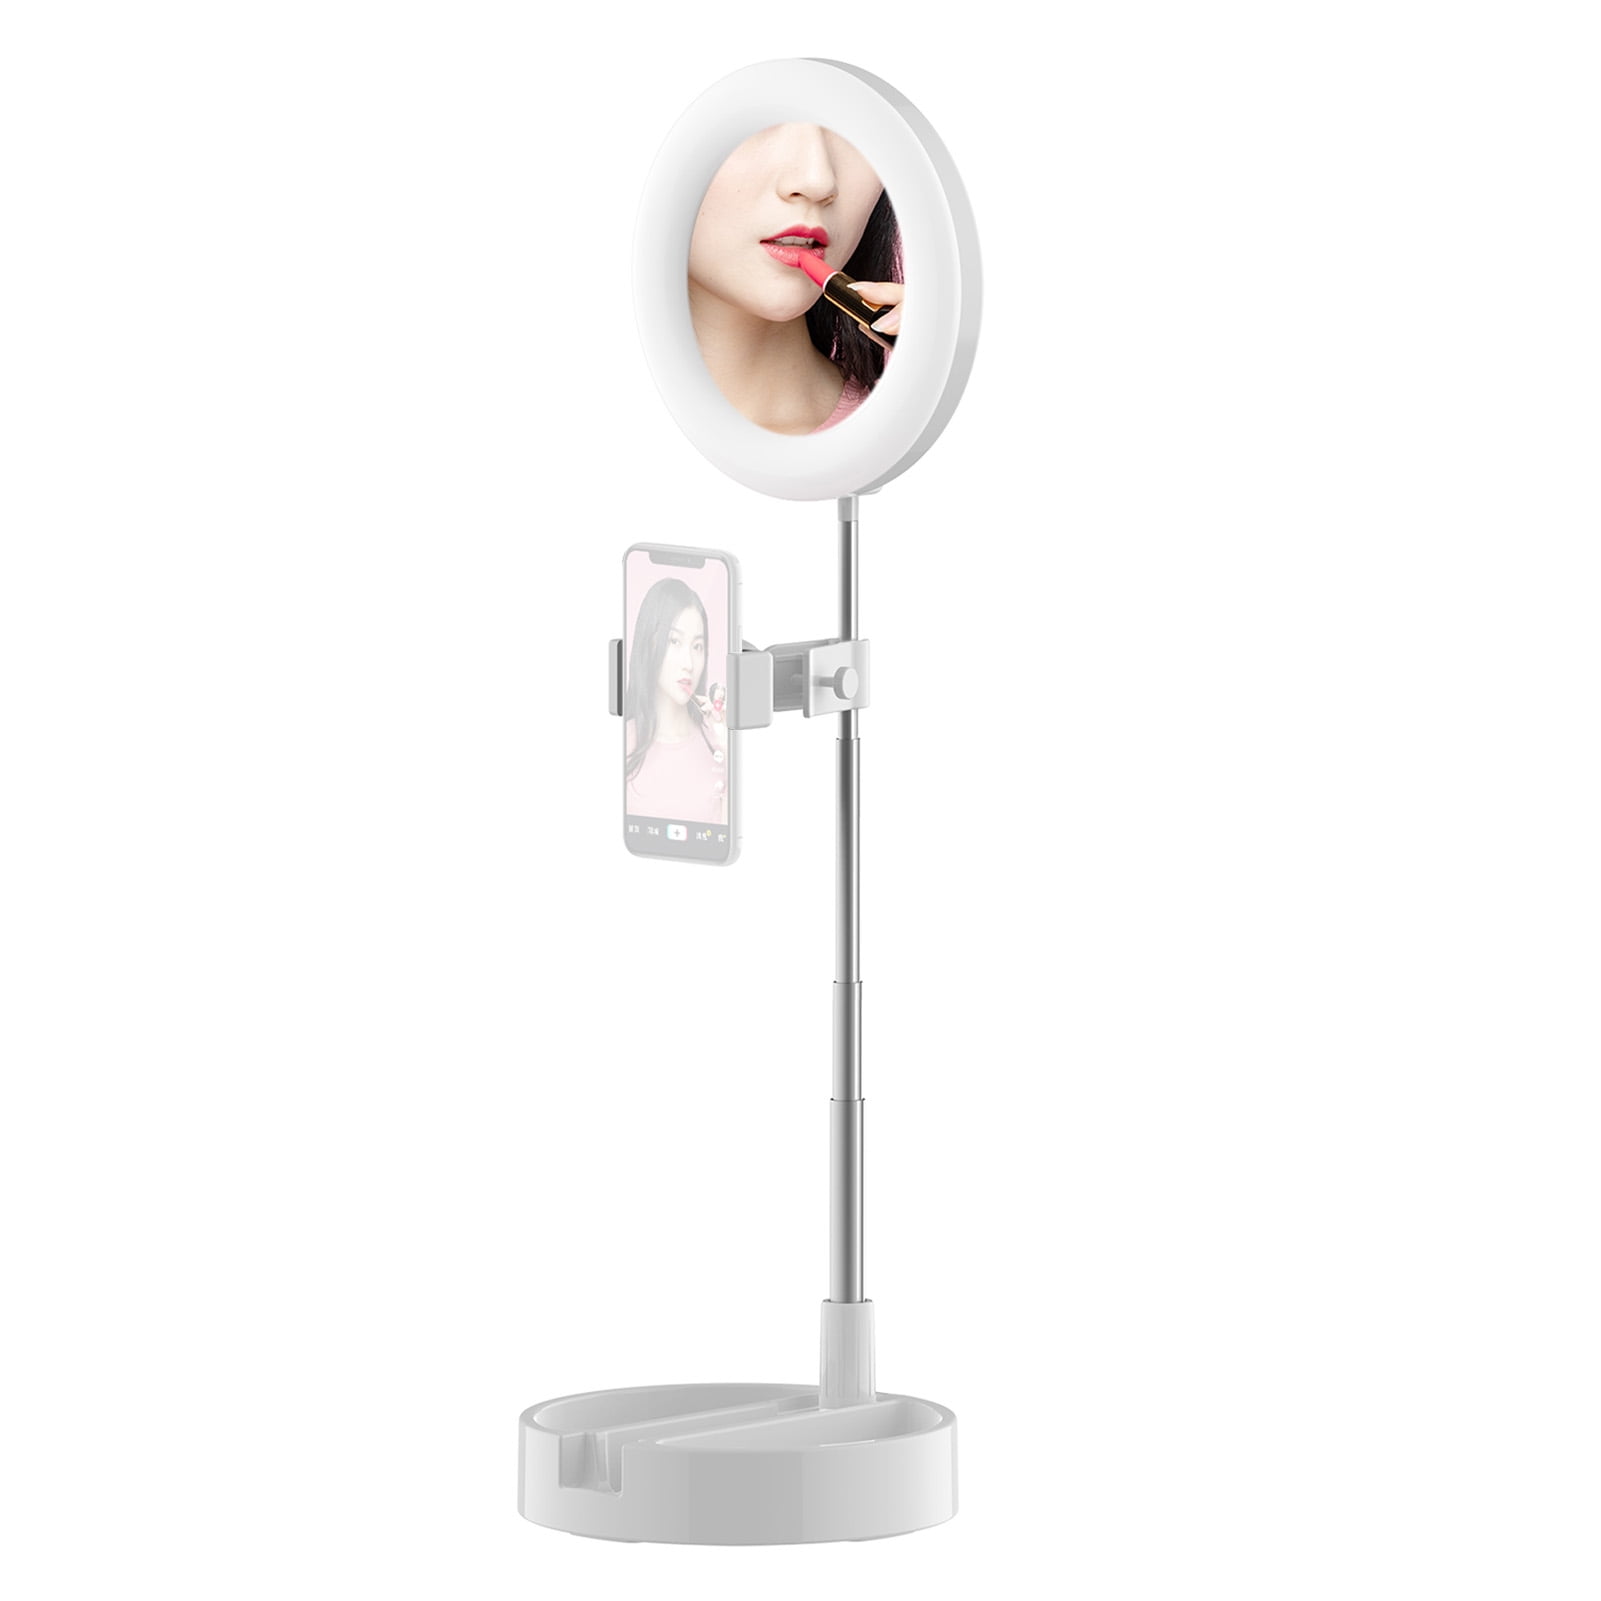 Foldable Desk Circle Lamp Fill Light with Makeup Mirror Phone Holder 3 Color Modes & 10 Brightness Levels for Selfie Video Recording Andoer Portable LED Ring Light 